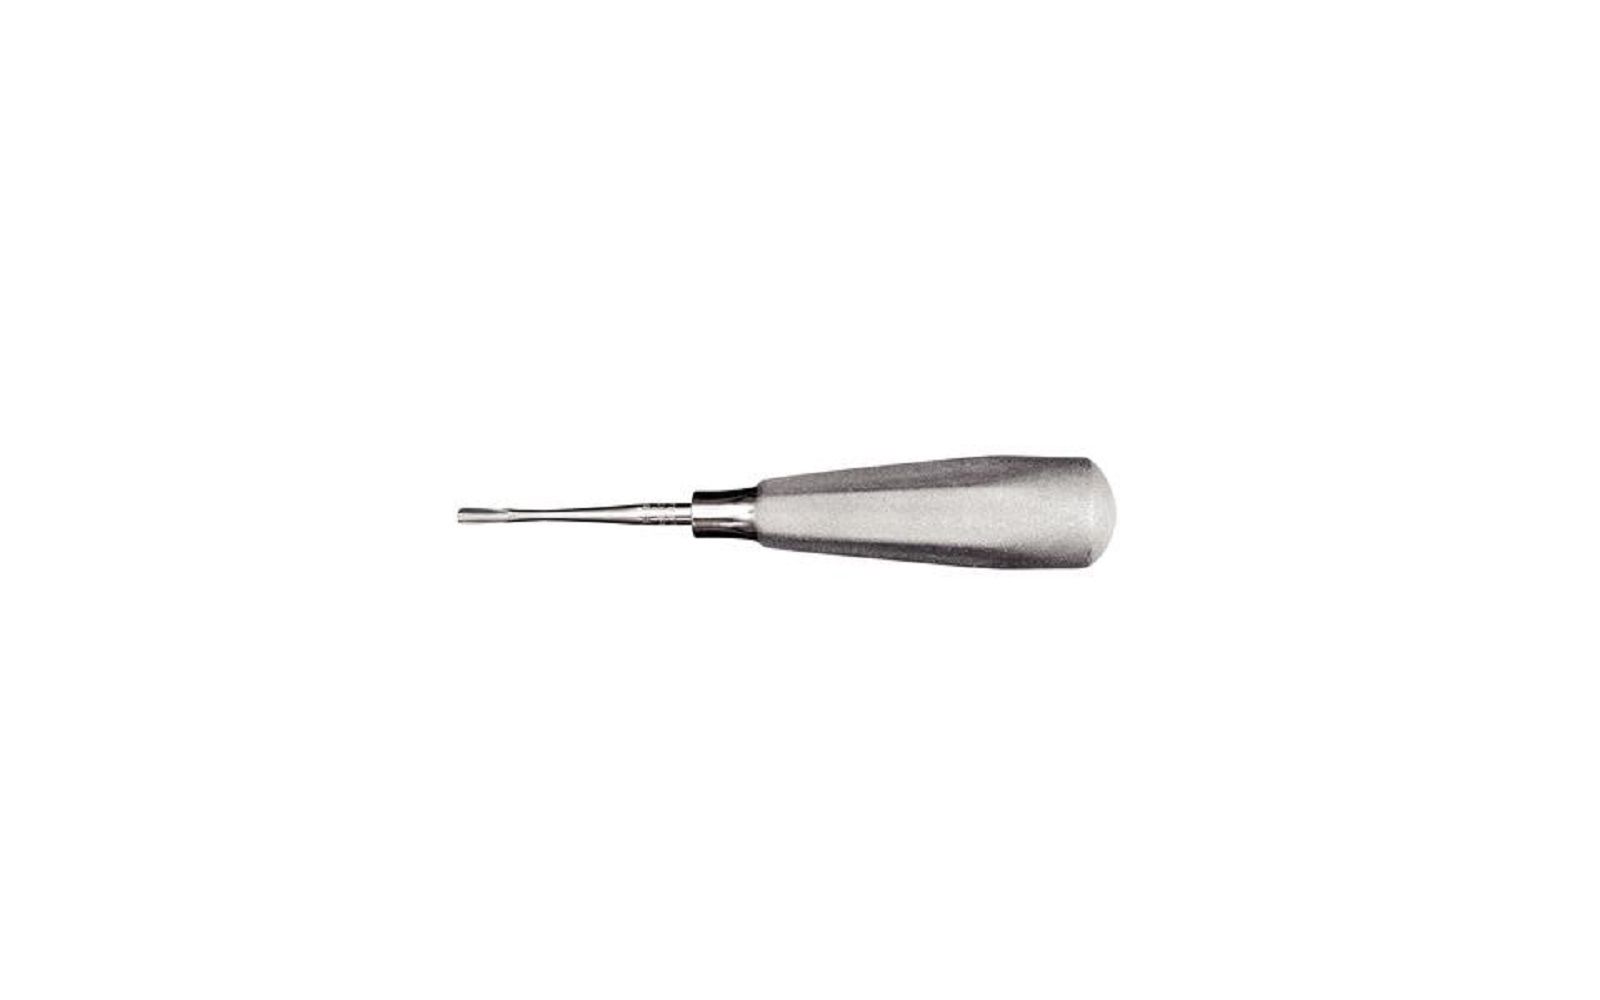 Surgical elevators – luxating, straight, 4 mm, single end - large tapered hexagonal handle